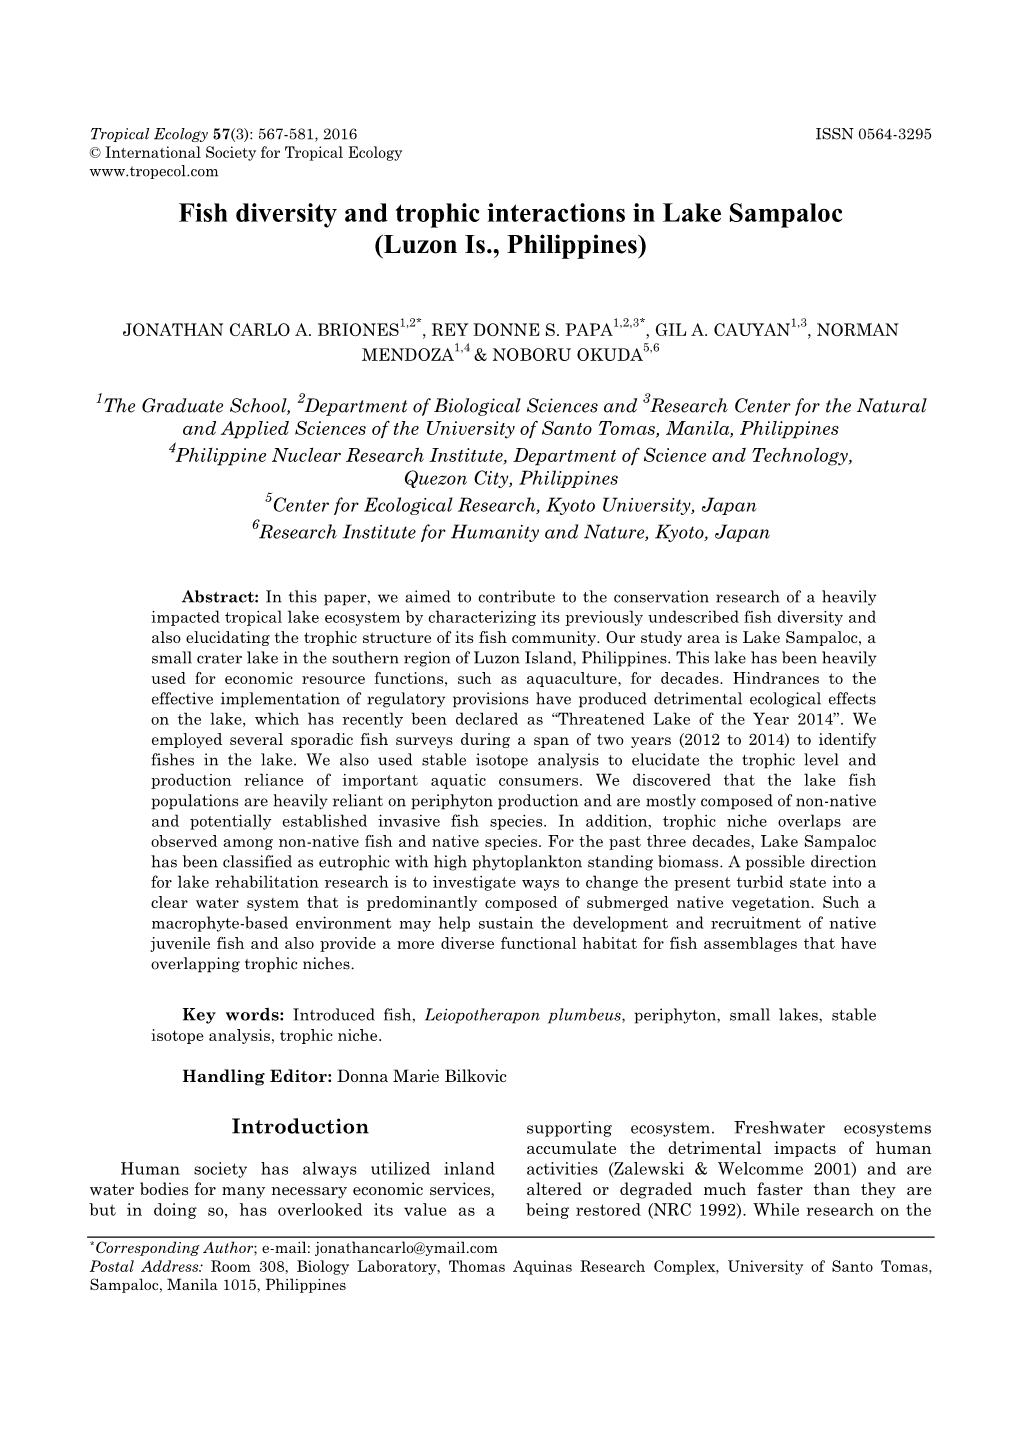 Fish Diversity and Trophic Interactions in Lake Sampaloc (Luzon Is., Philippines)